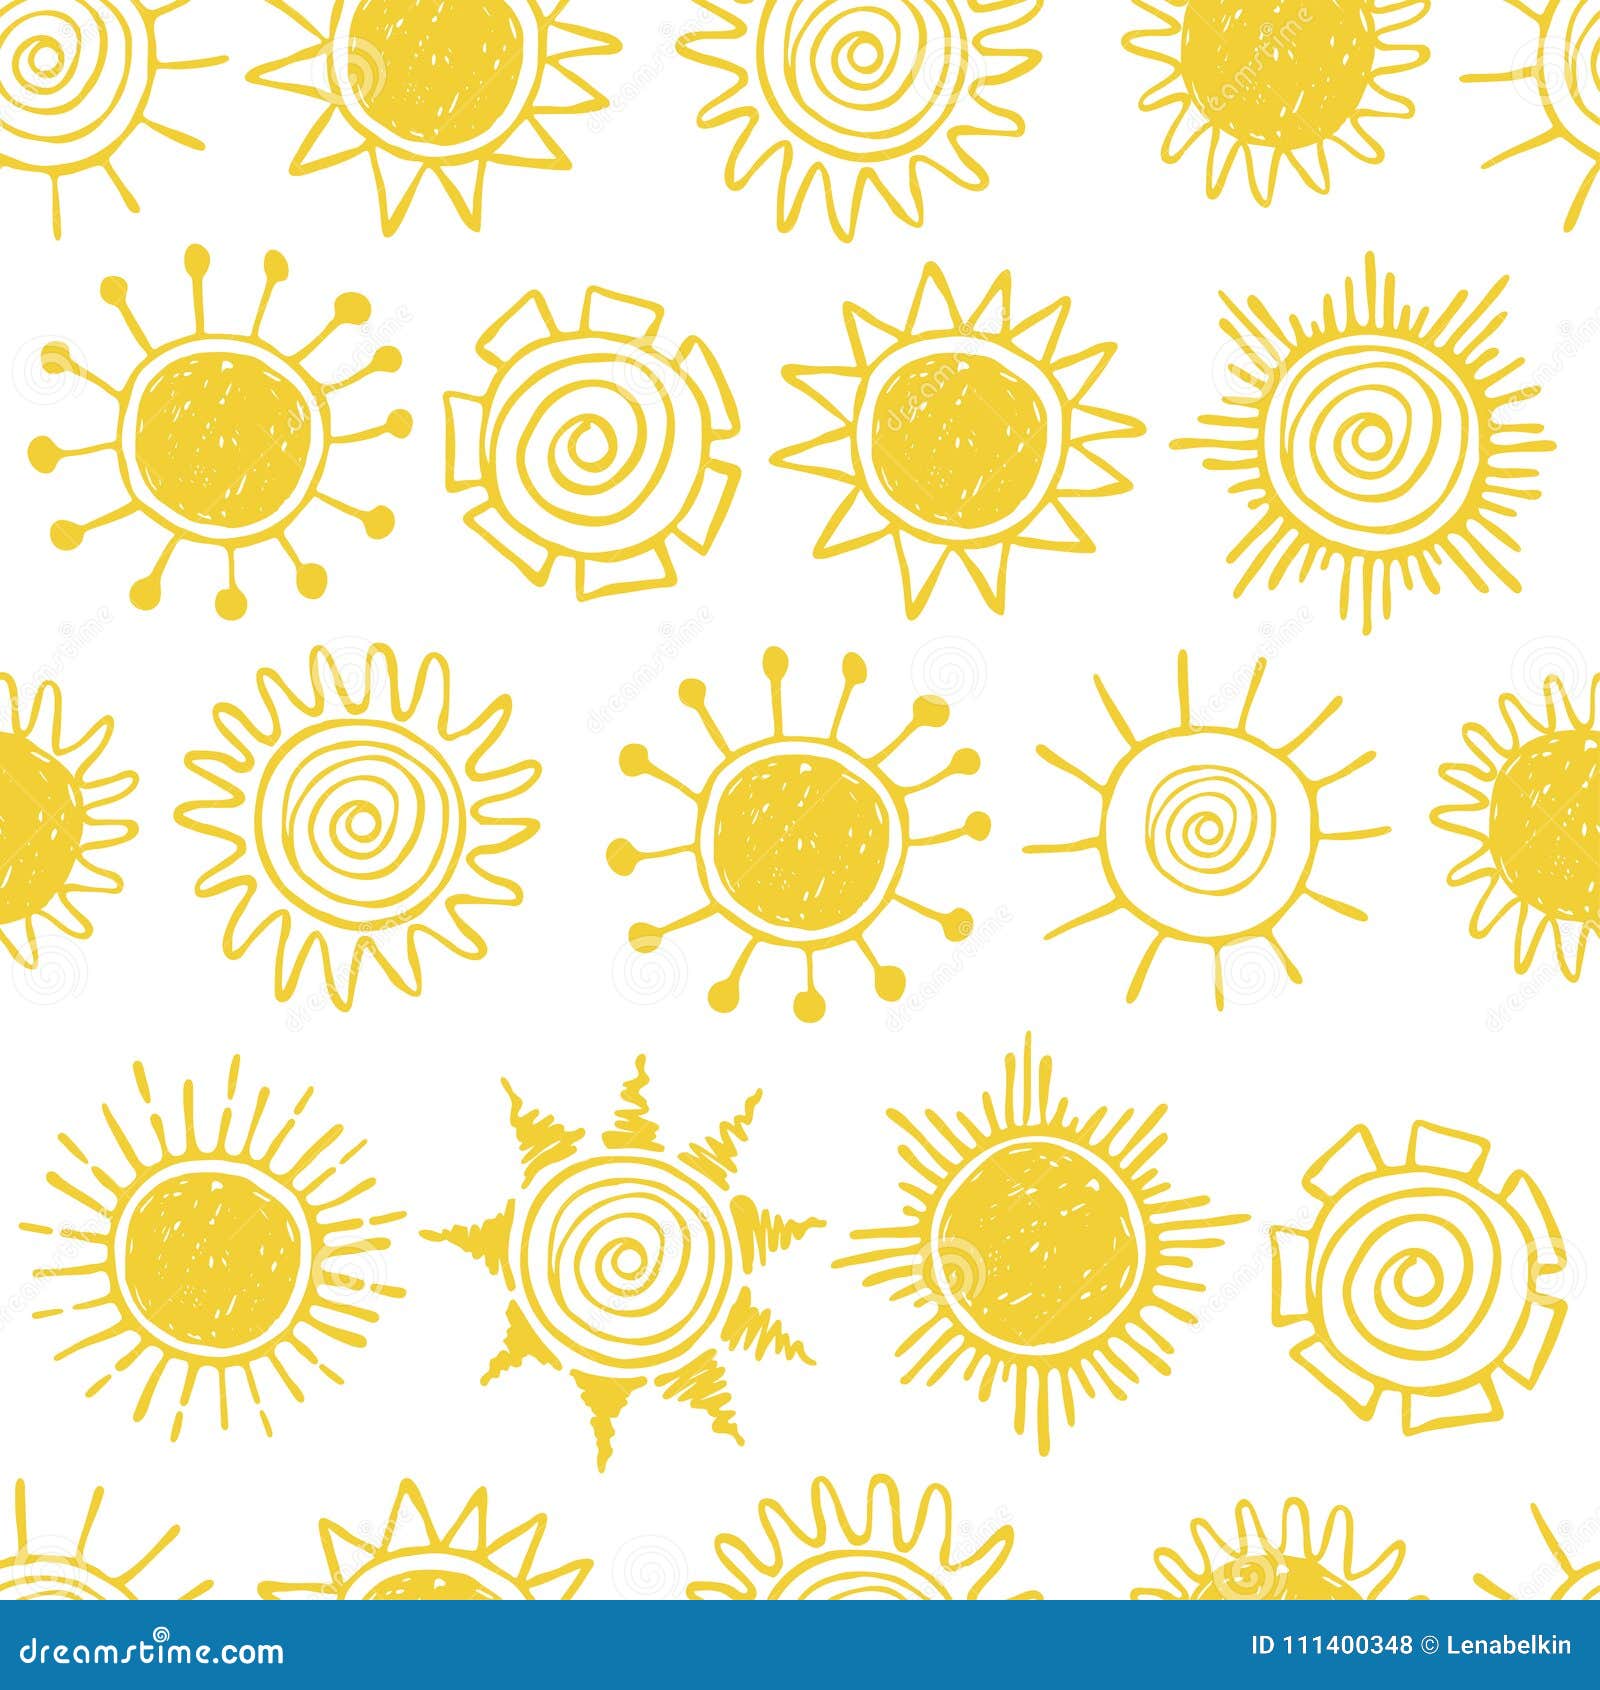 Pattern with Hand Drawn Yellow Suns Stock Vector - Illustration of ...